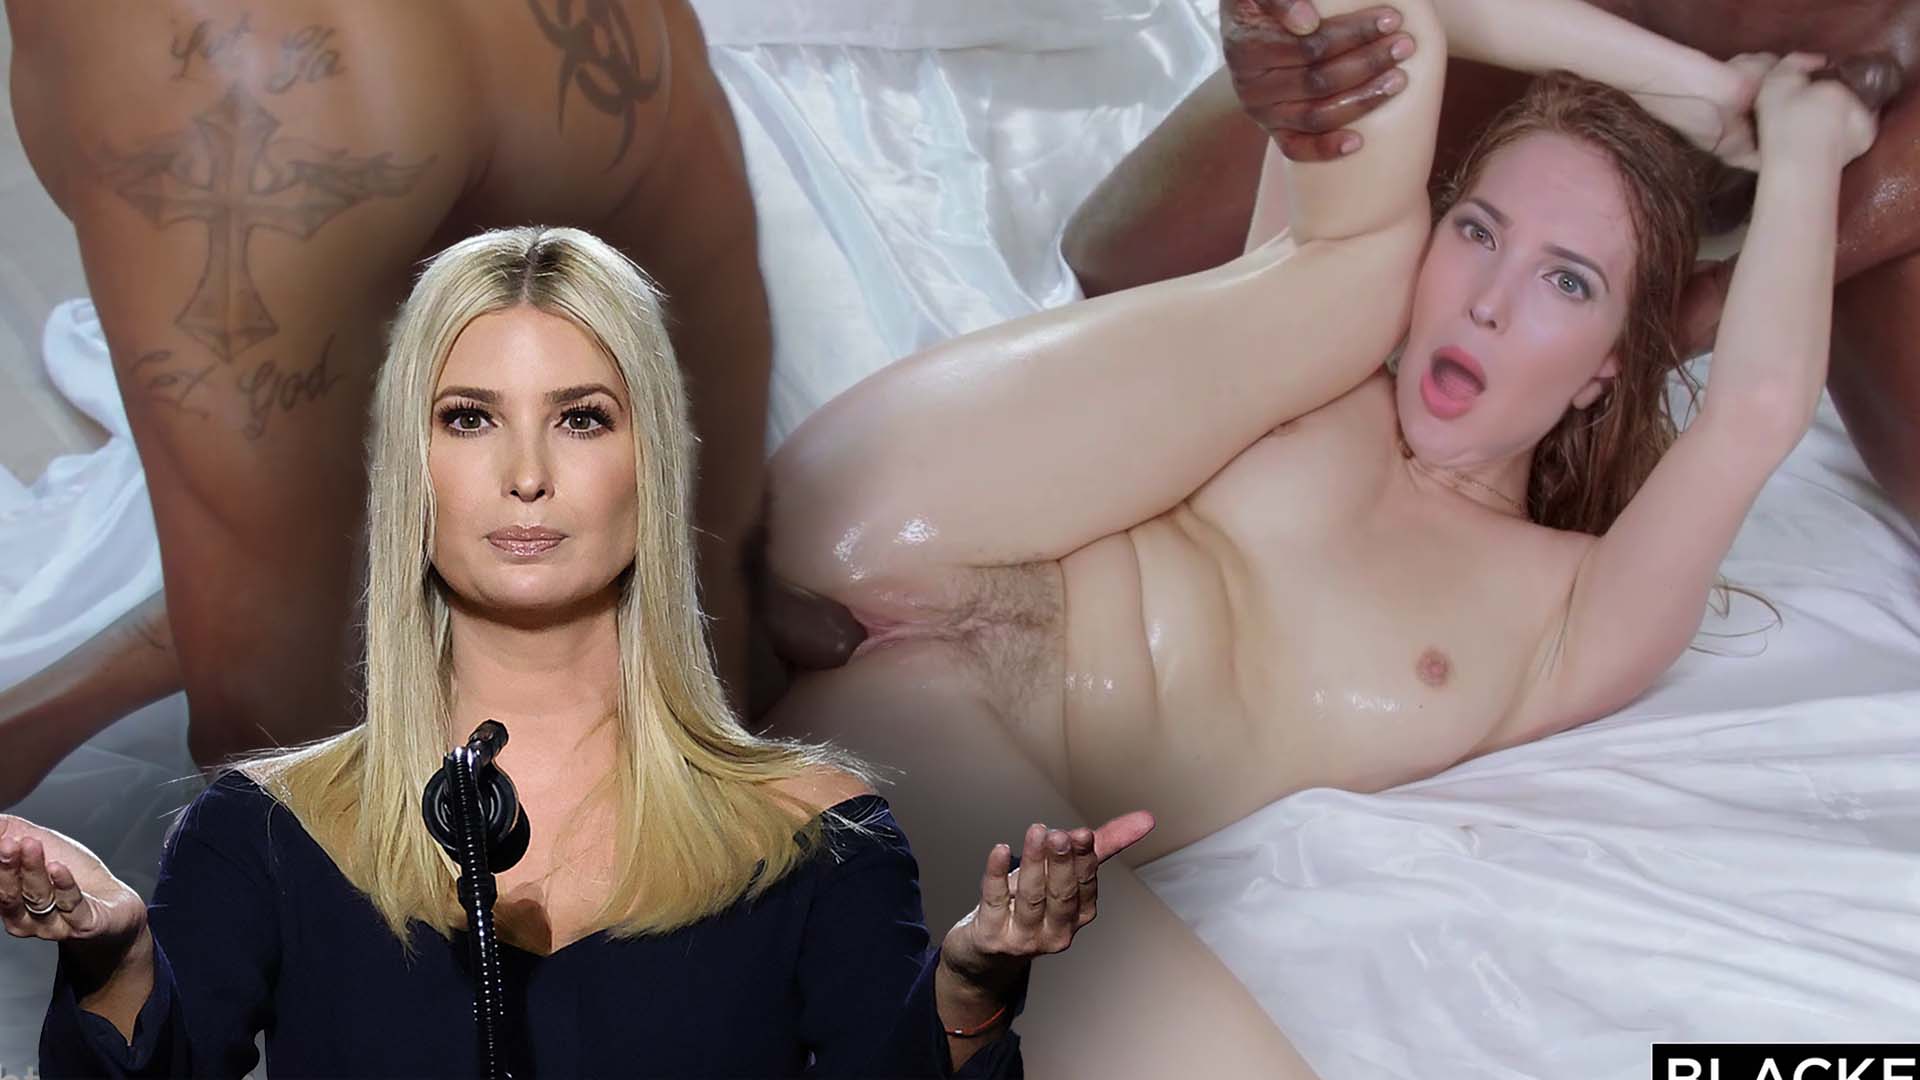 Ivanka Trump Ravaged by 2 Black Guys. She Can't Stop Cumming.